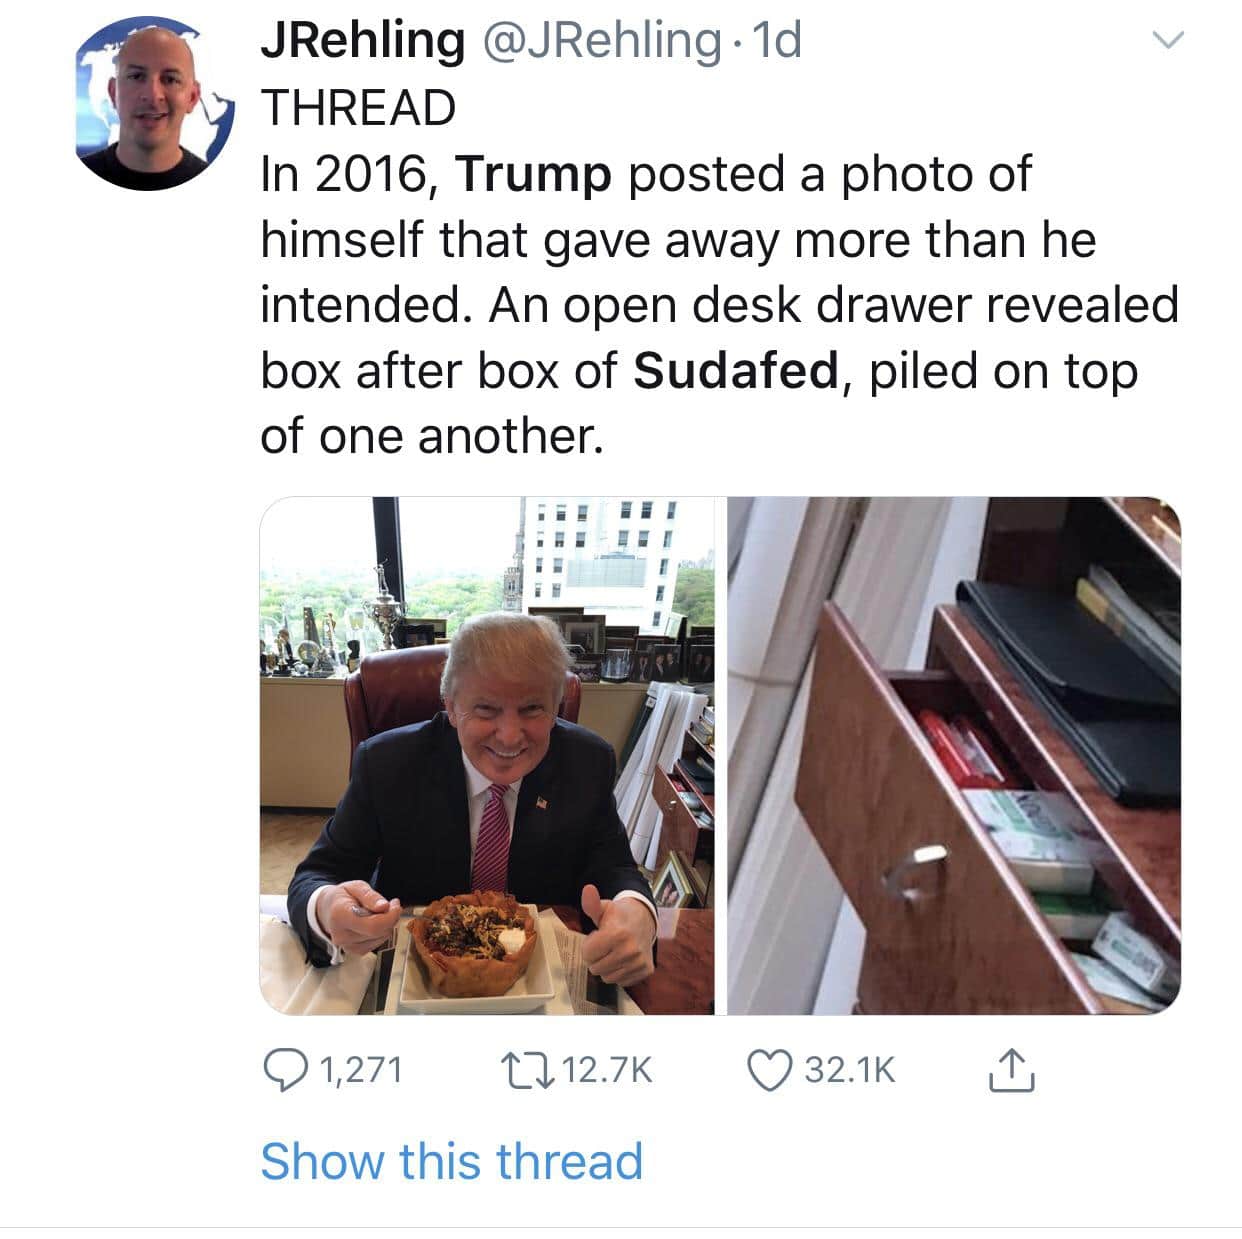 political political-memes political text: JRehling @JRehling Id THREAD In 2016, Trump posted a photo of himself that gave away more than he intended. An open desk drawer revealed box after box of Sudafed, piled on top of one another. Q 1,271 n 12.7K Show this thread 0 32.1K 